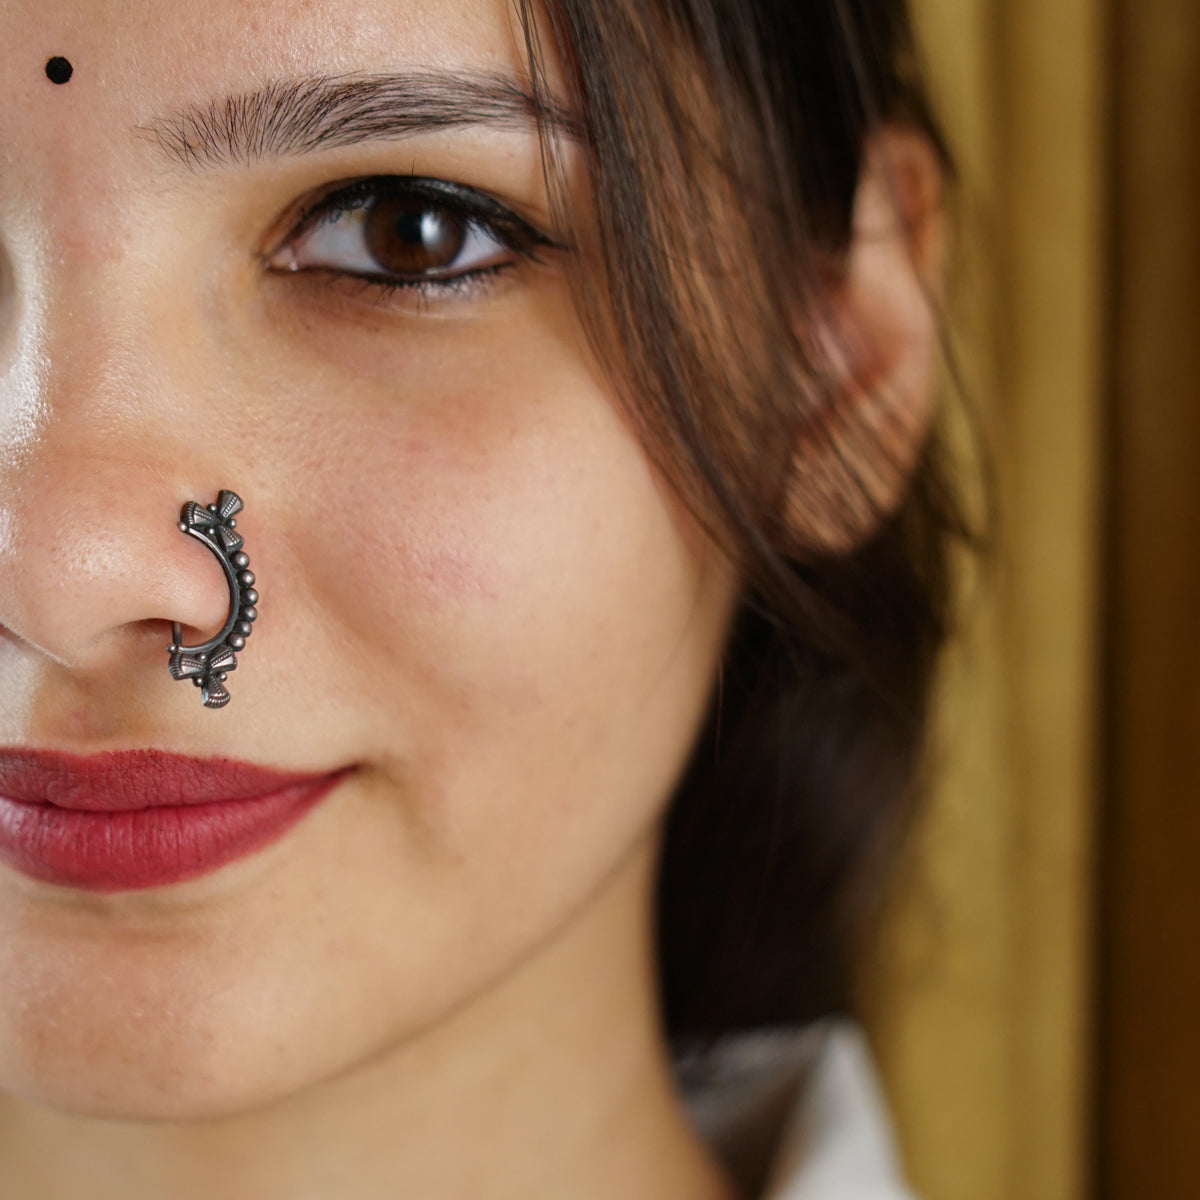 a close up of a woman with a nose piercing